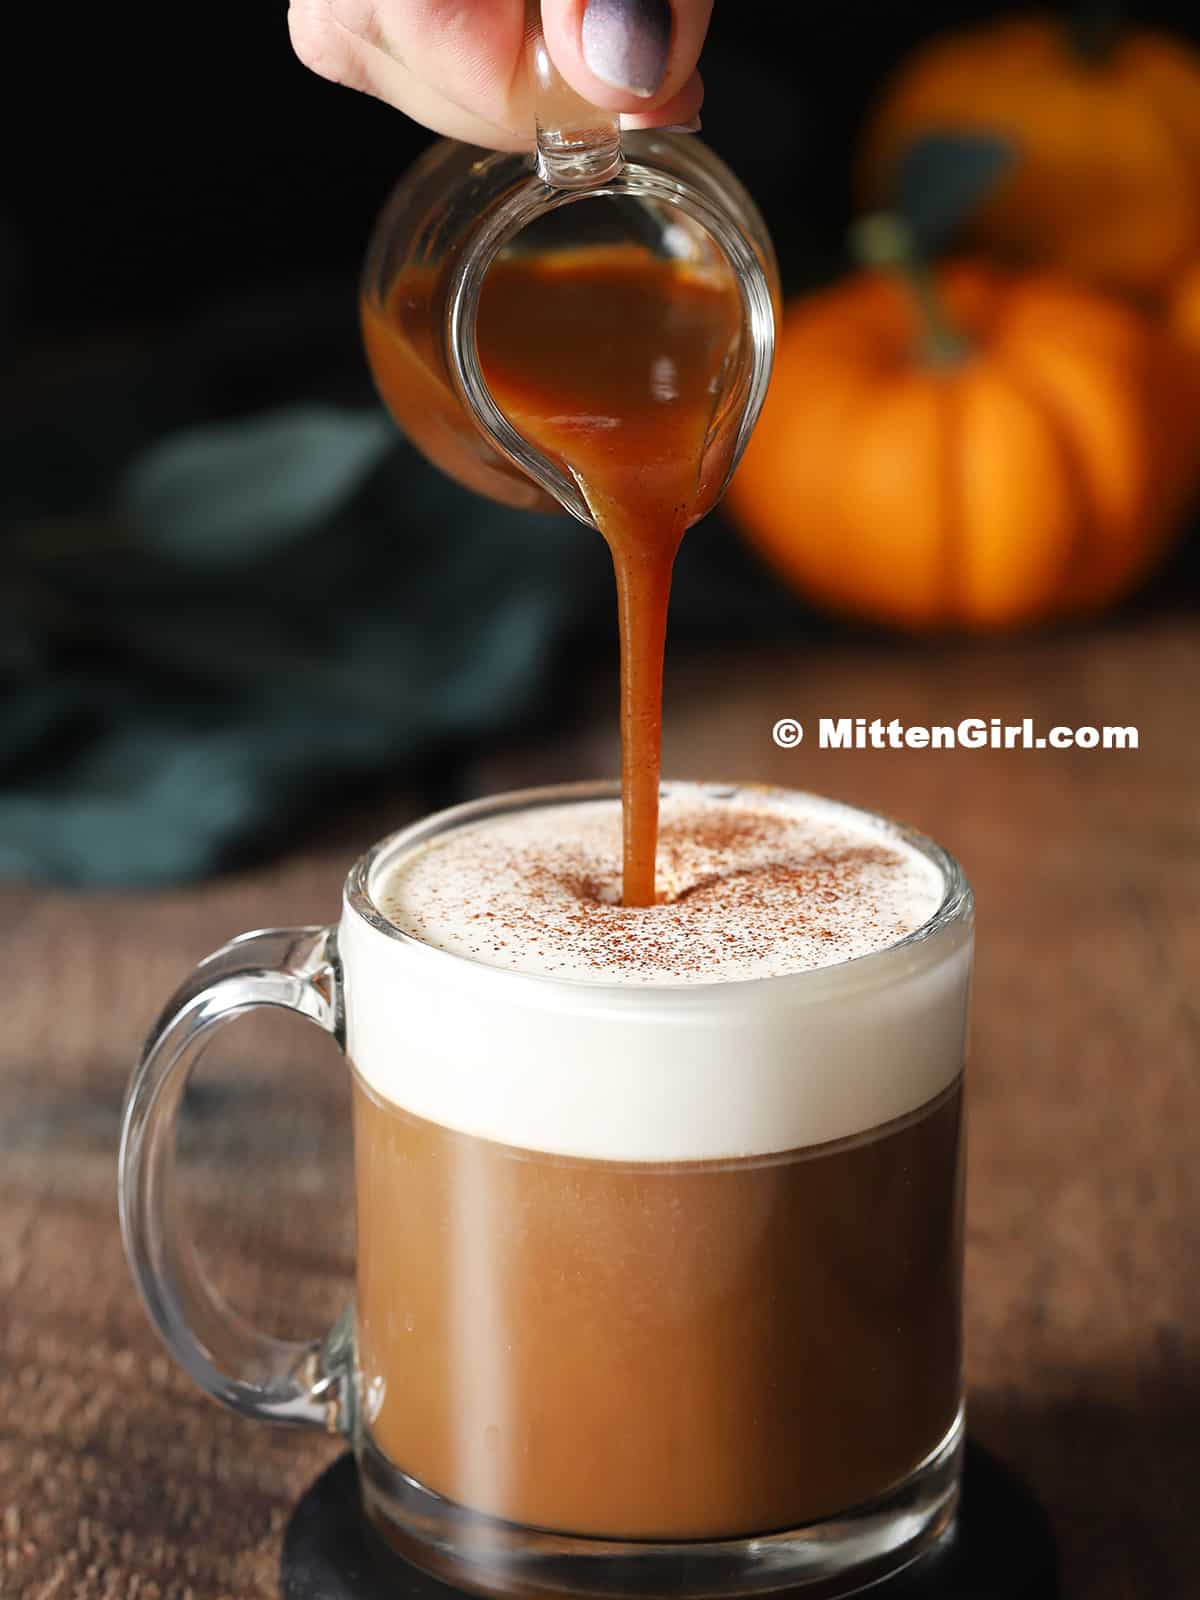 Pumpkin spice syrup being poured into a mug of coffee and cream. 